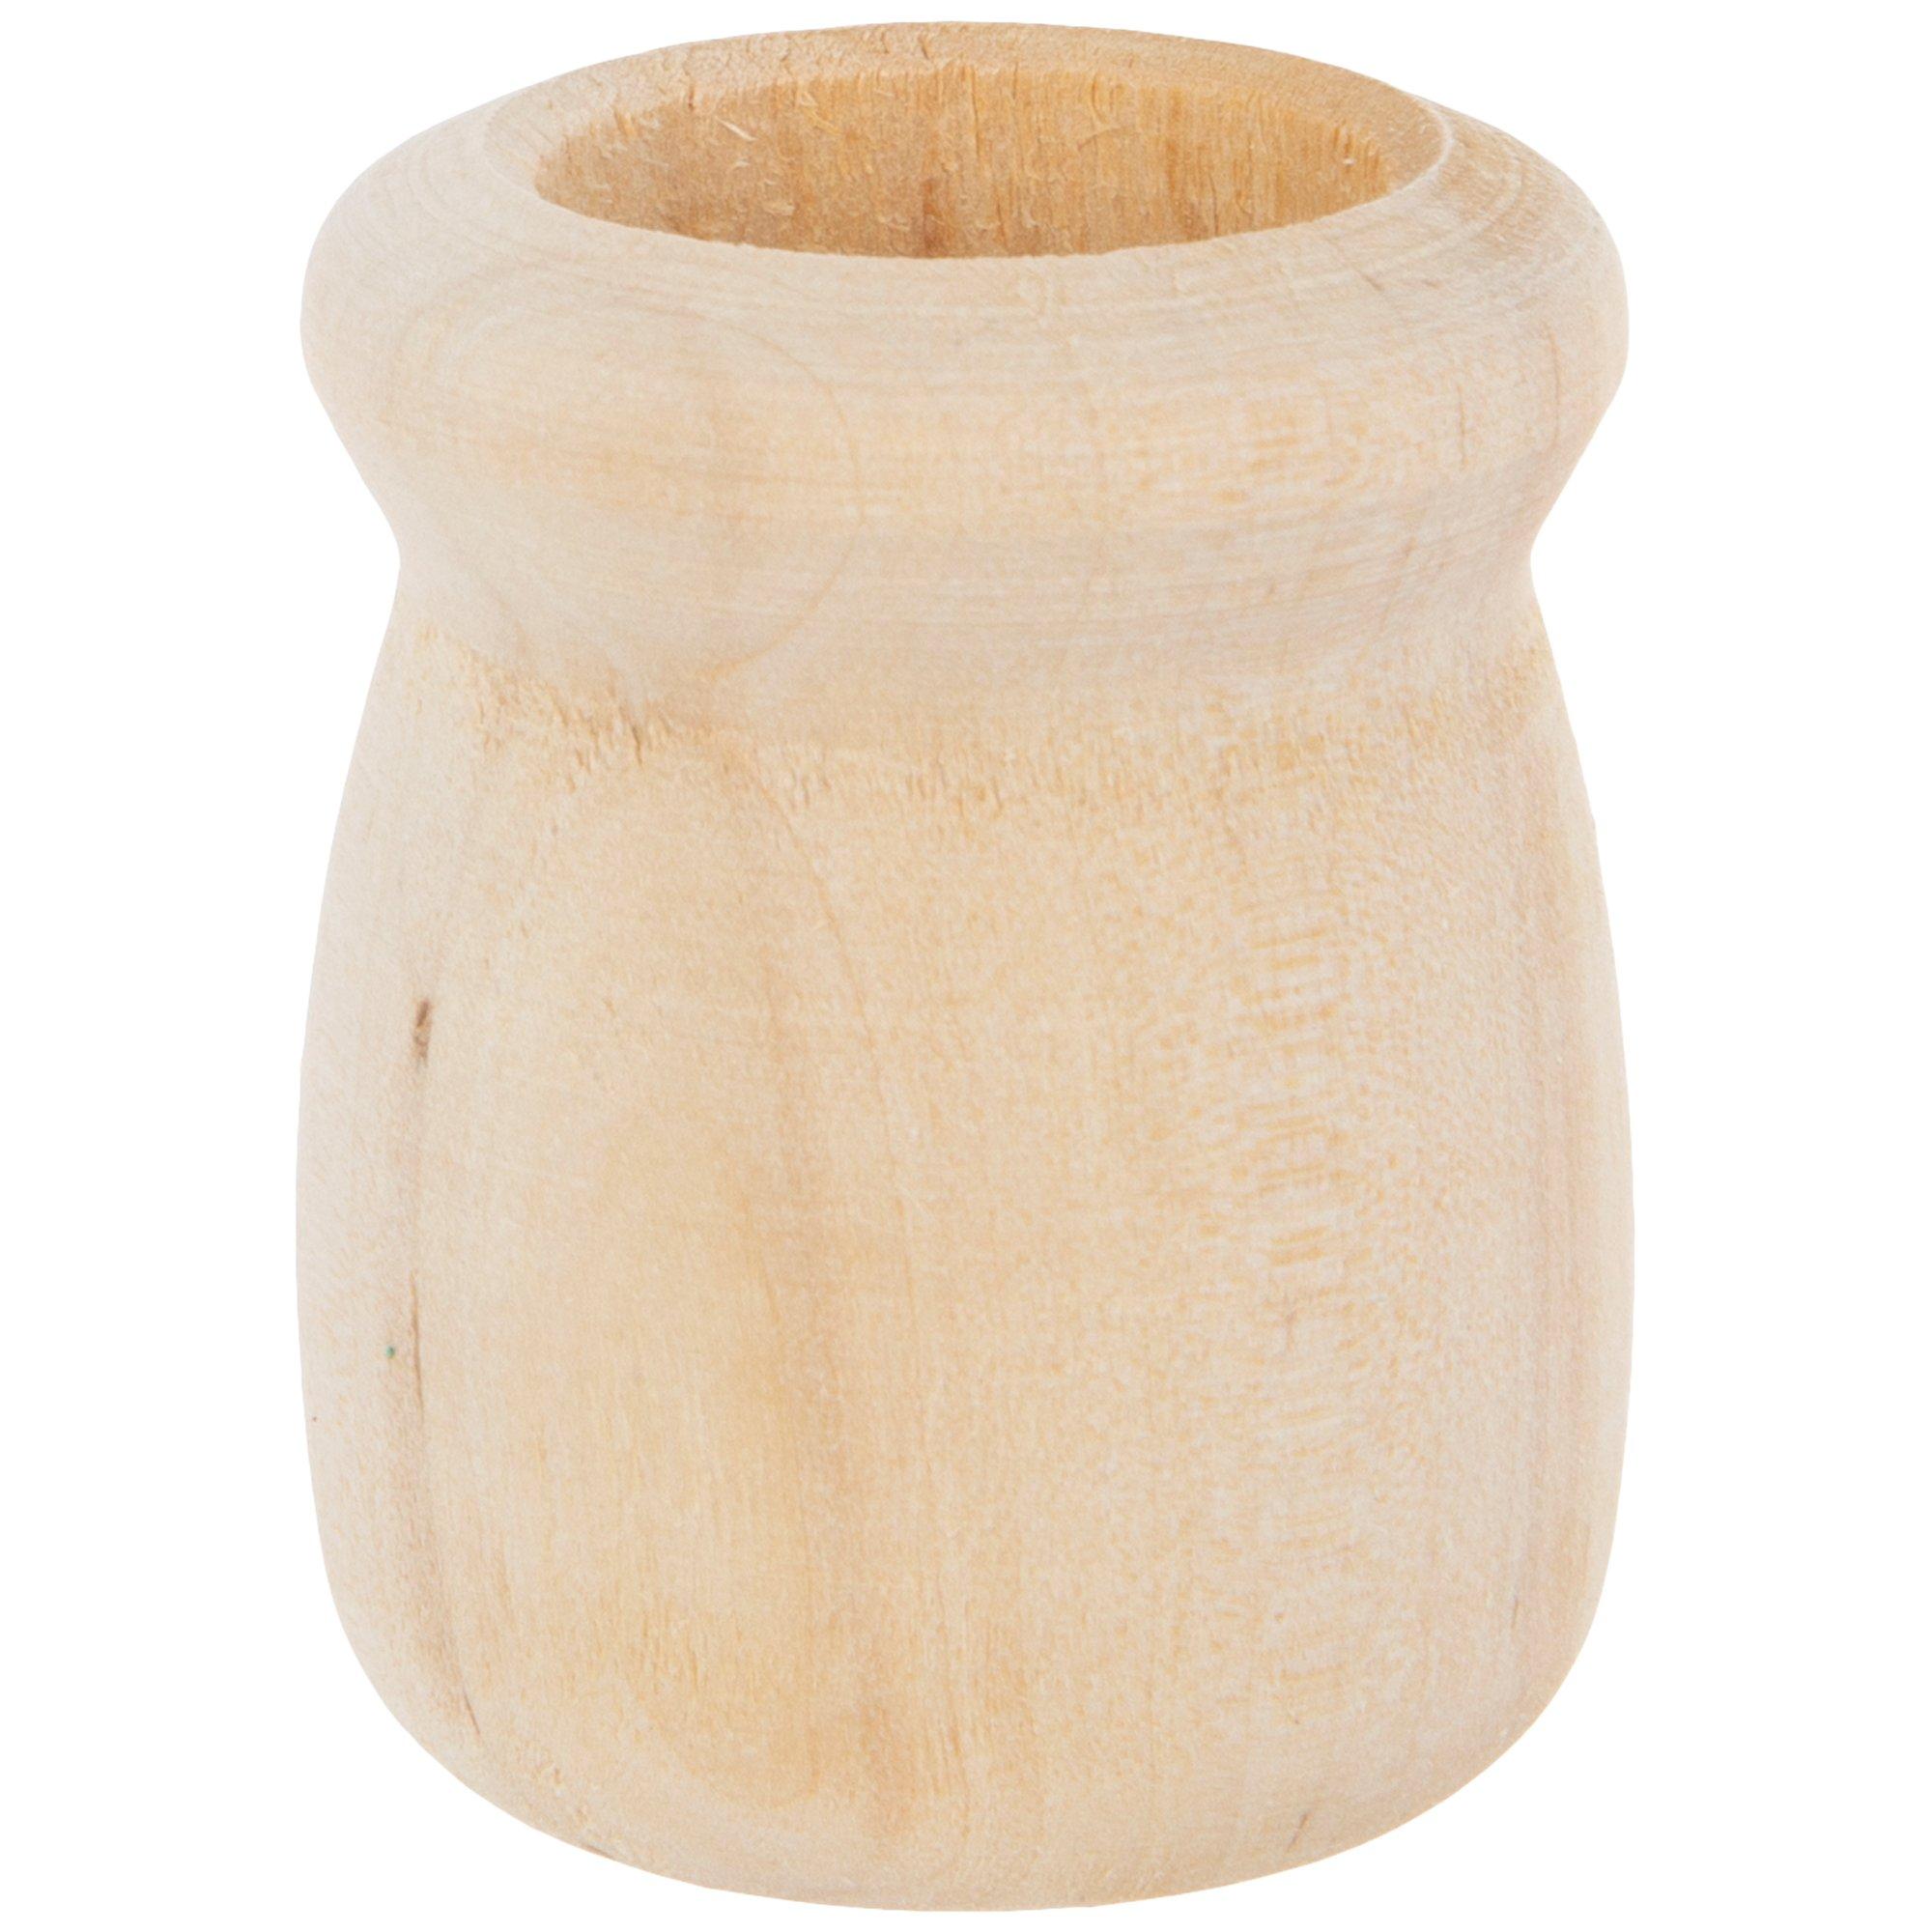 GORGECRAFT 1.5 Inch 10pcs Unfinished Wood Candle Cups Blank Candle Holders  Wooden Candlesticks 4/5 Inch Hole Classics Flower Container for Hand